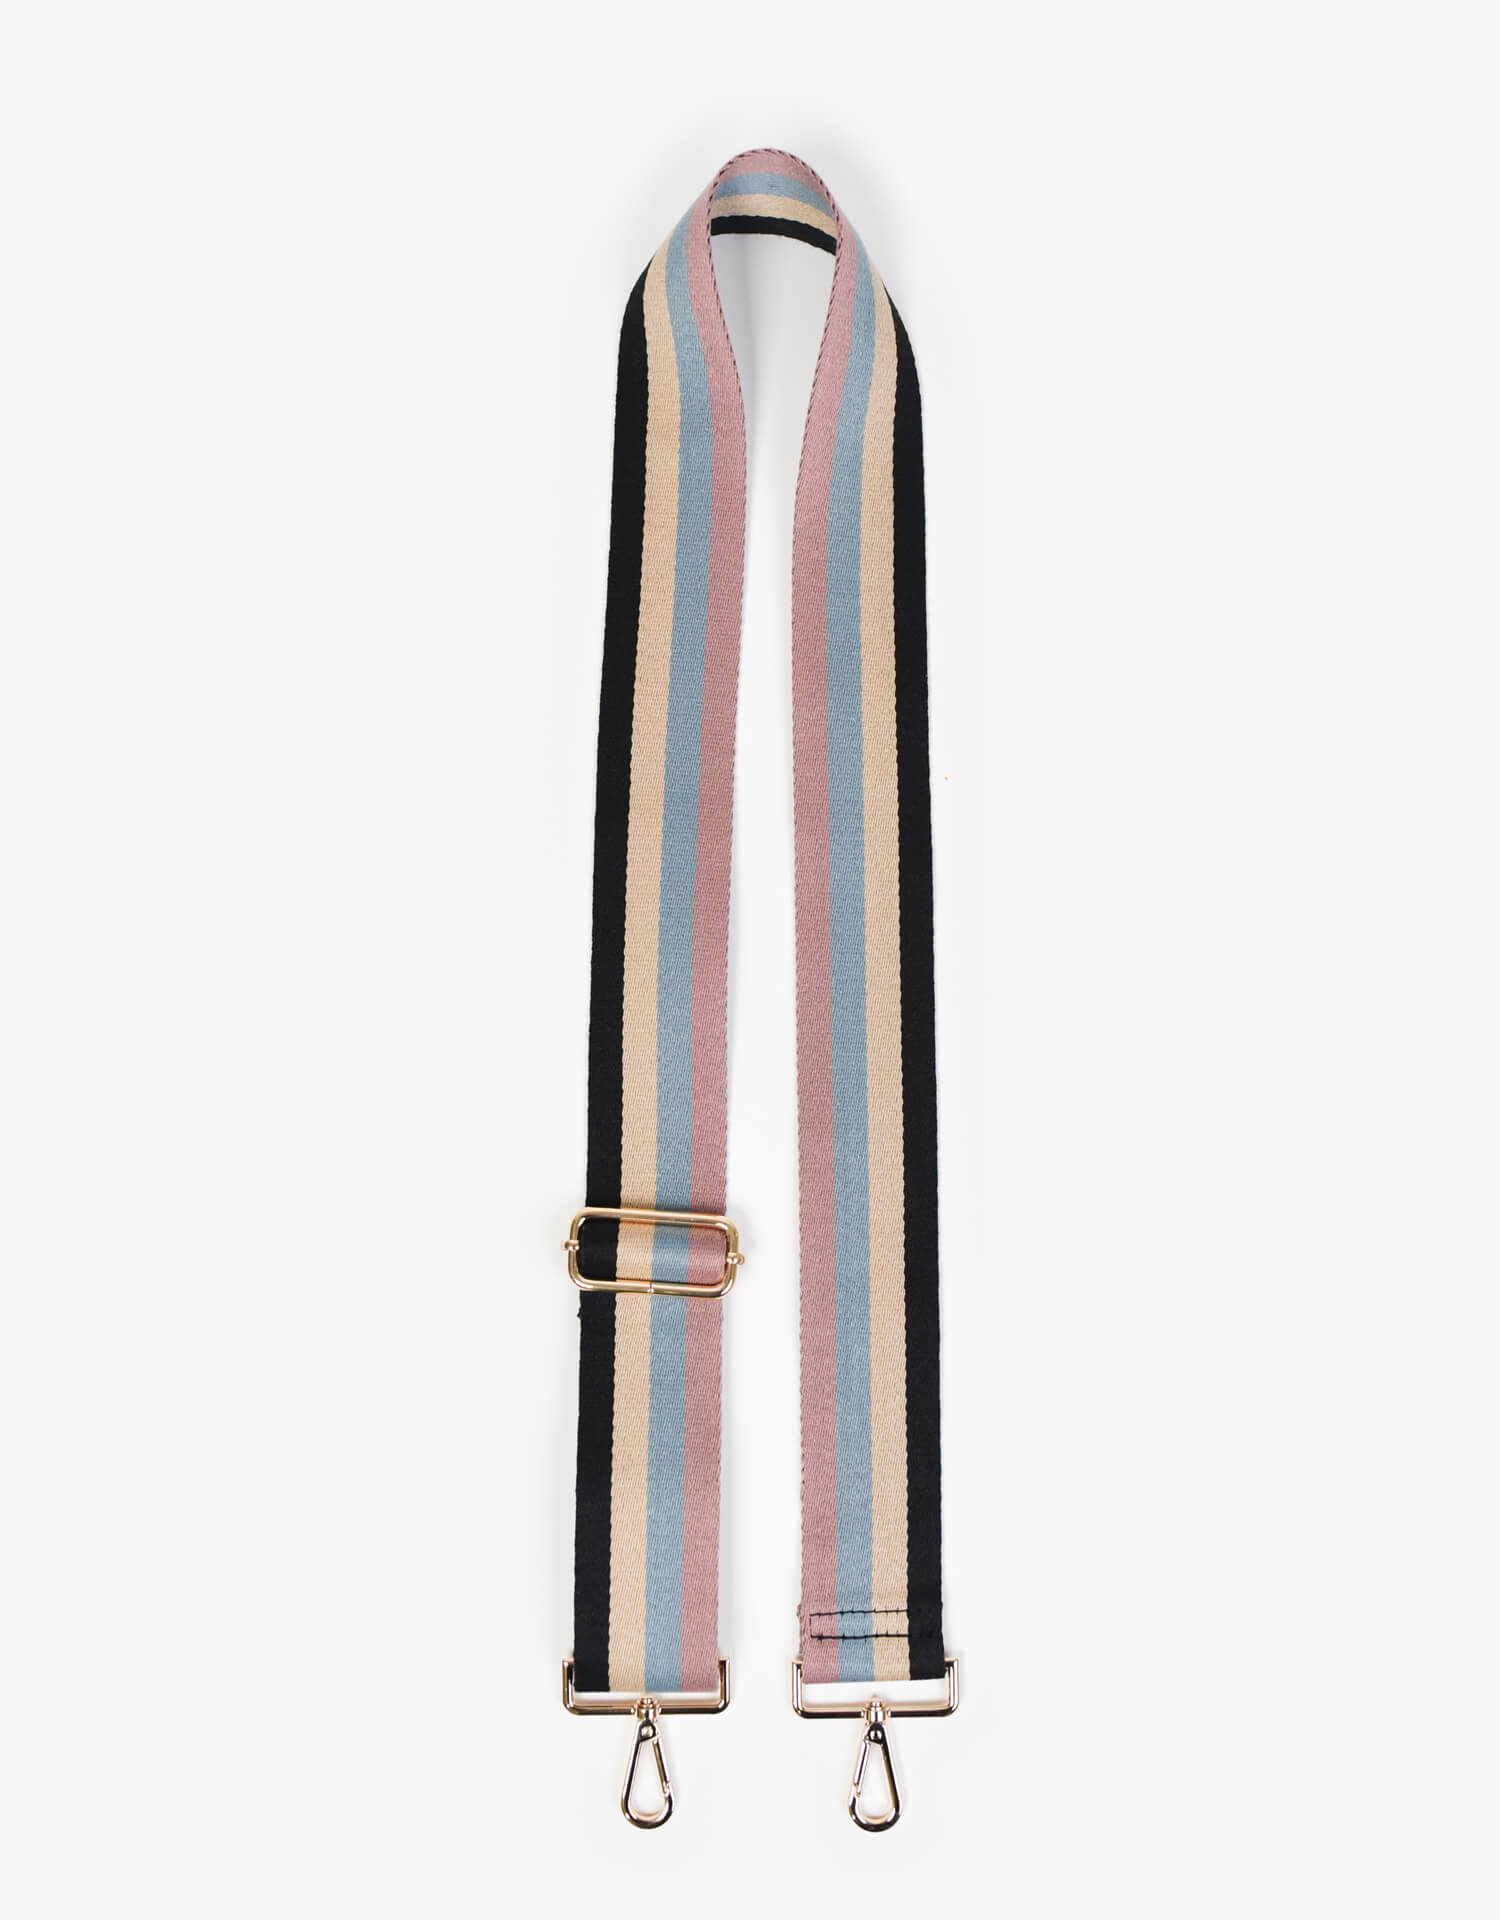 soft cotton polyester canvas strap in neutral stripes